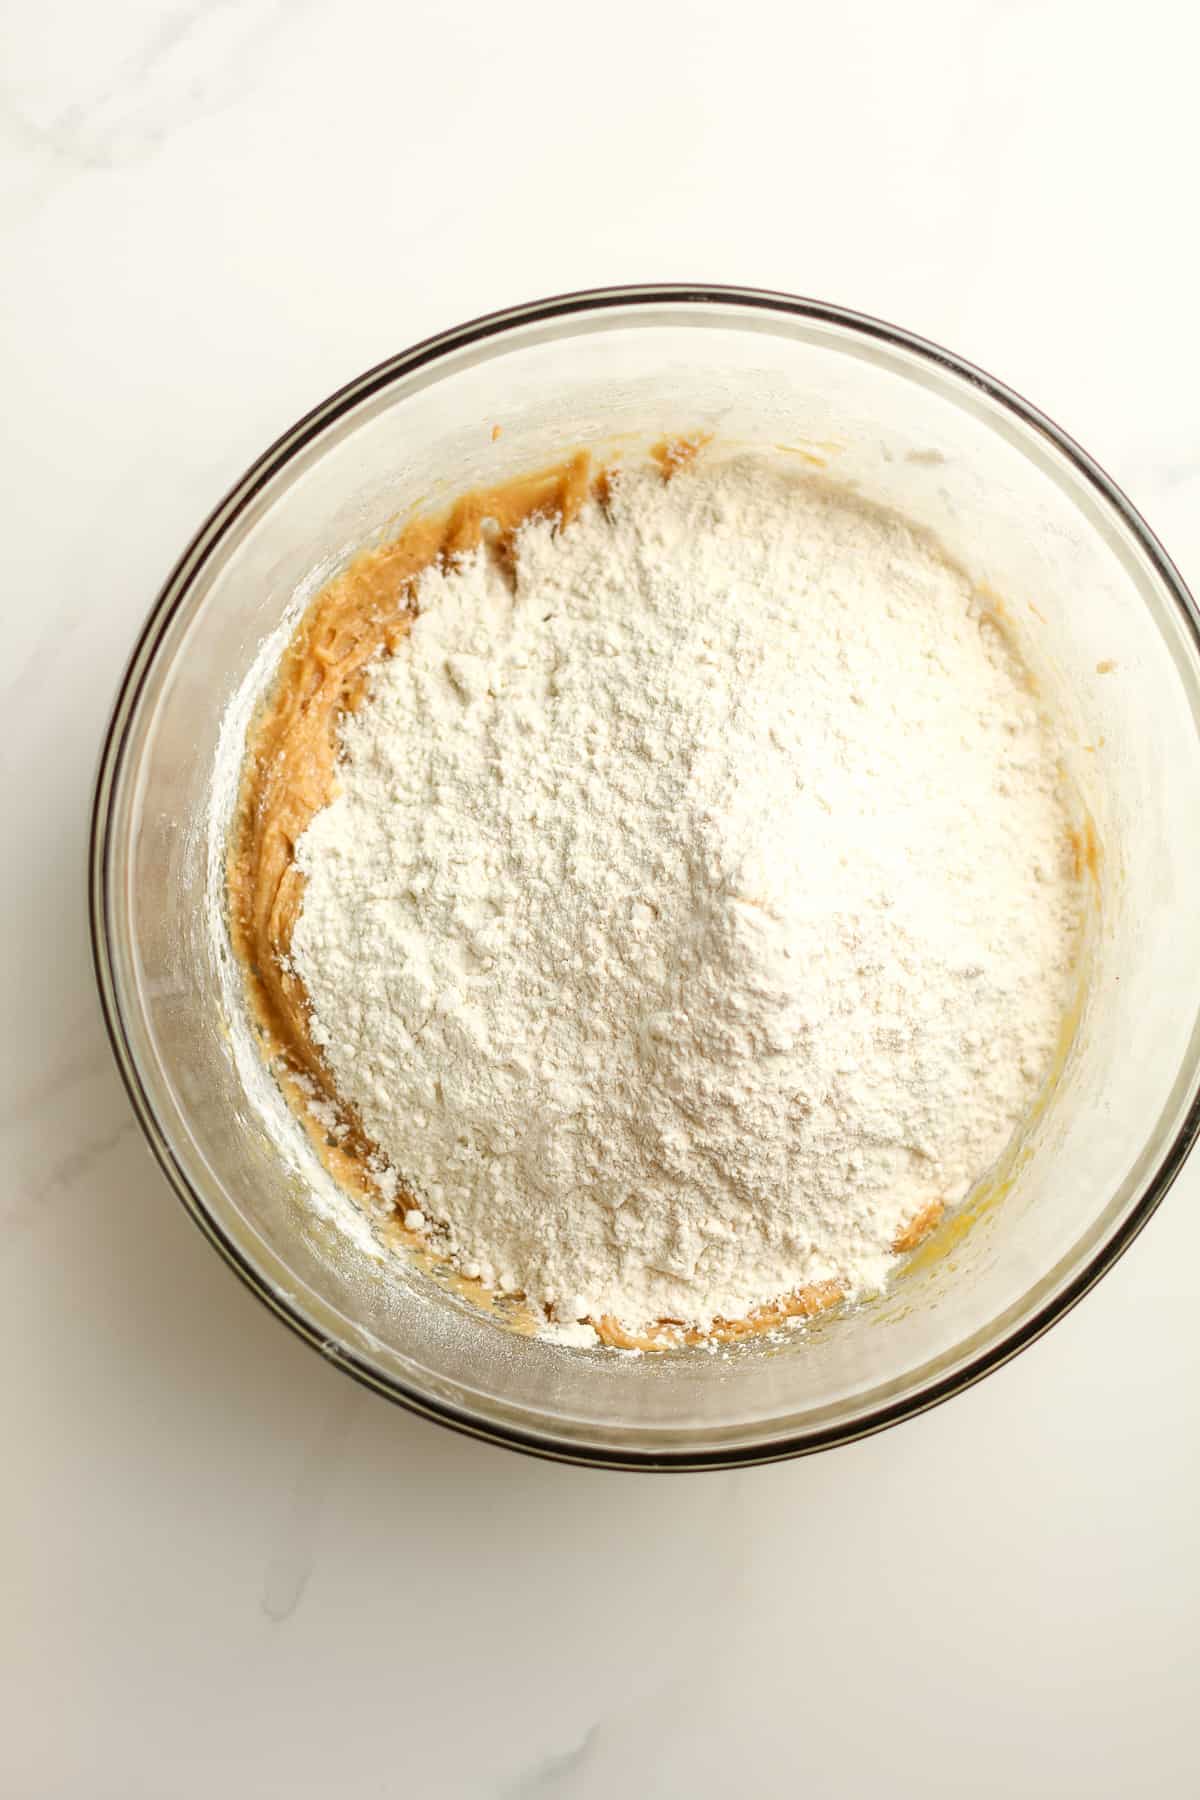 A bowl of the dough with the flour on top.